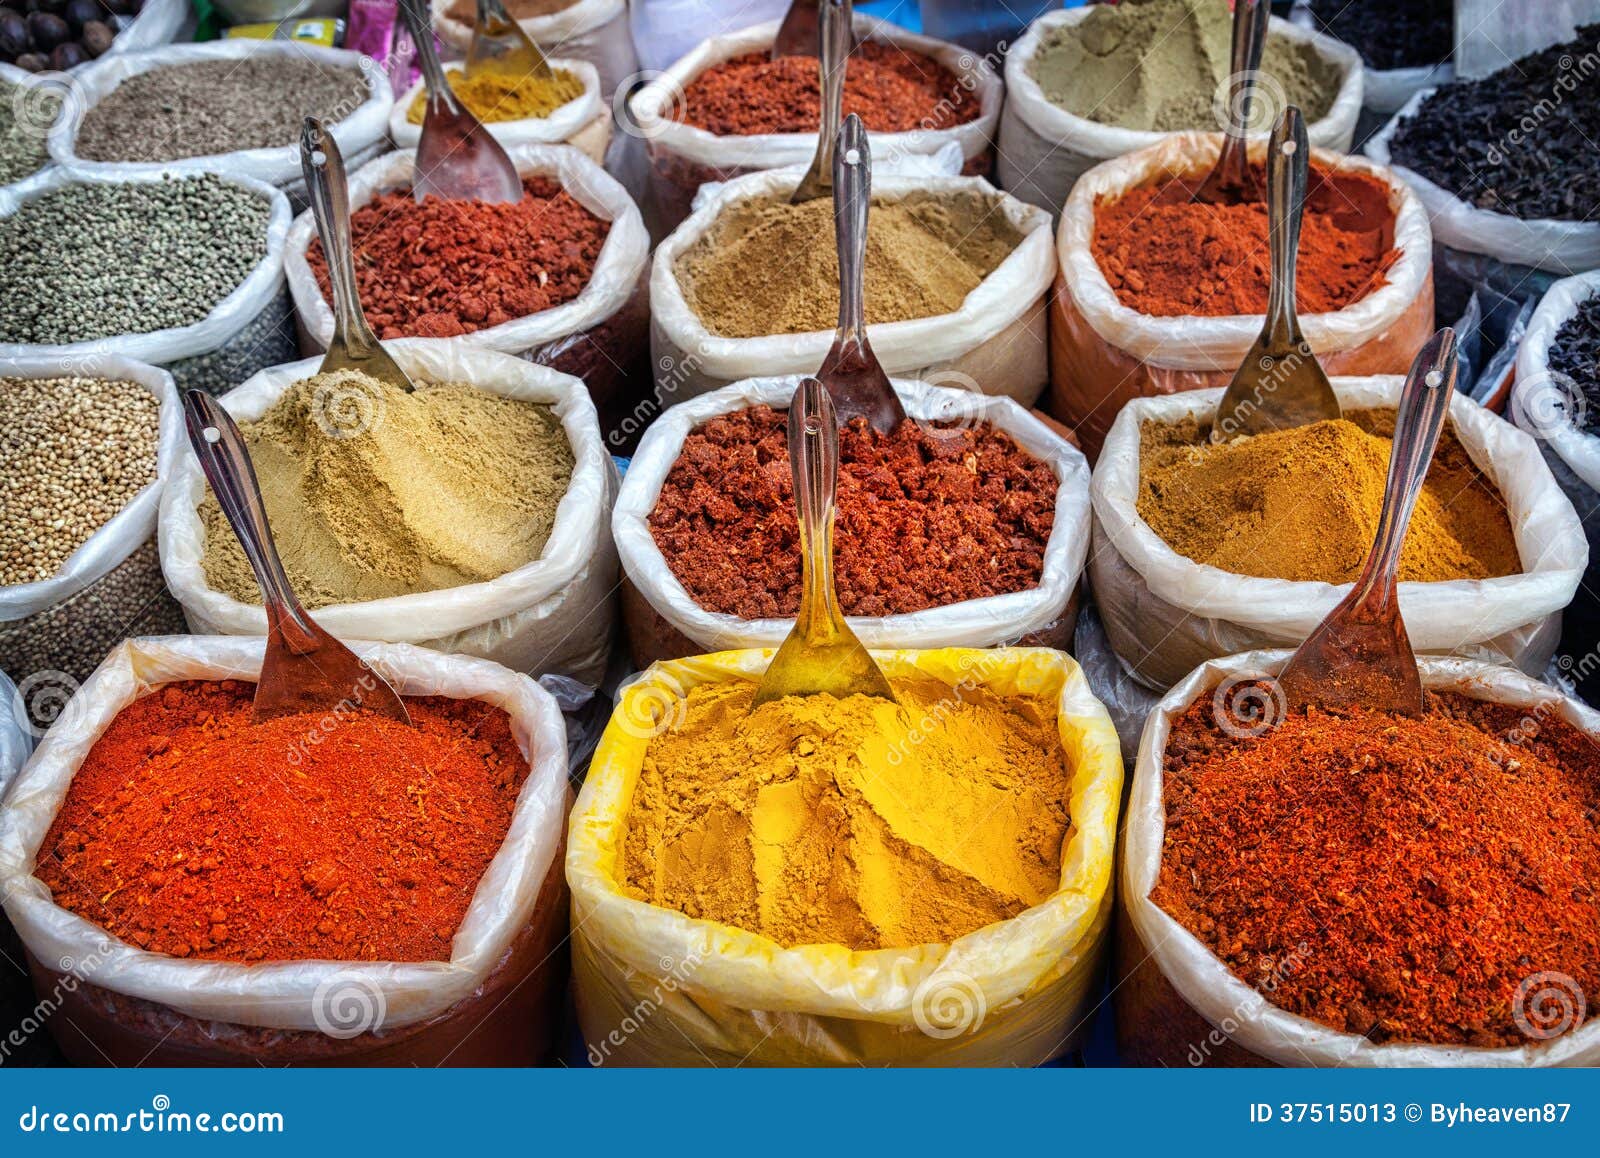 indian colorful spices